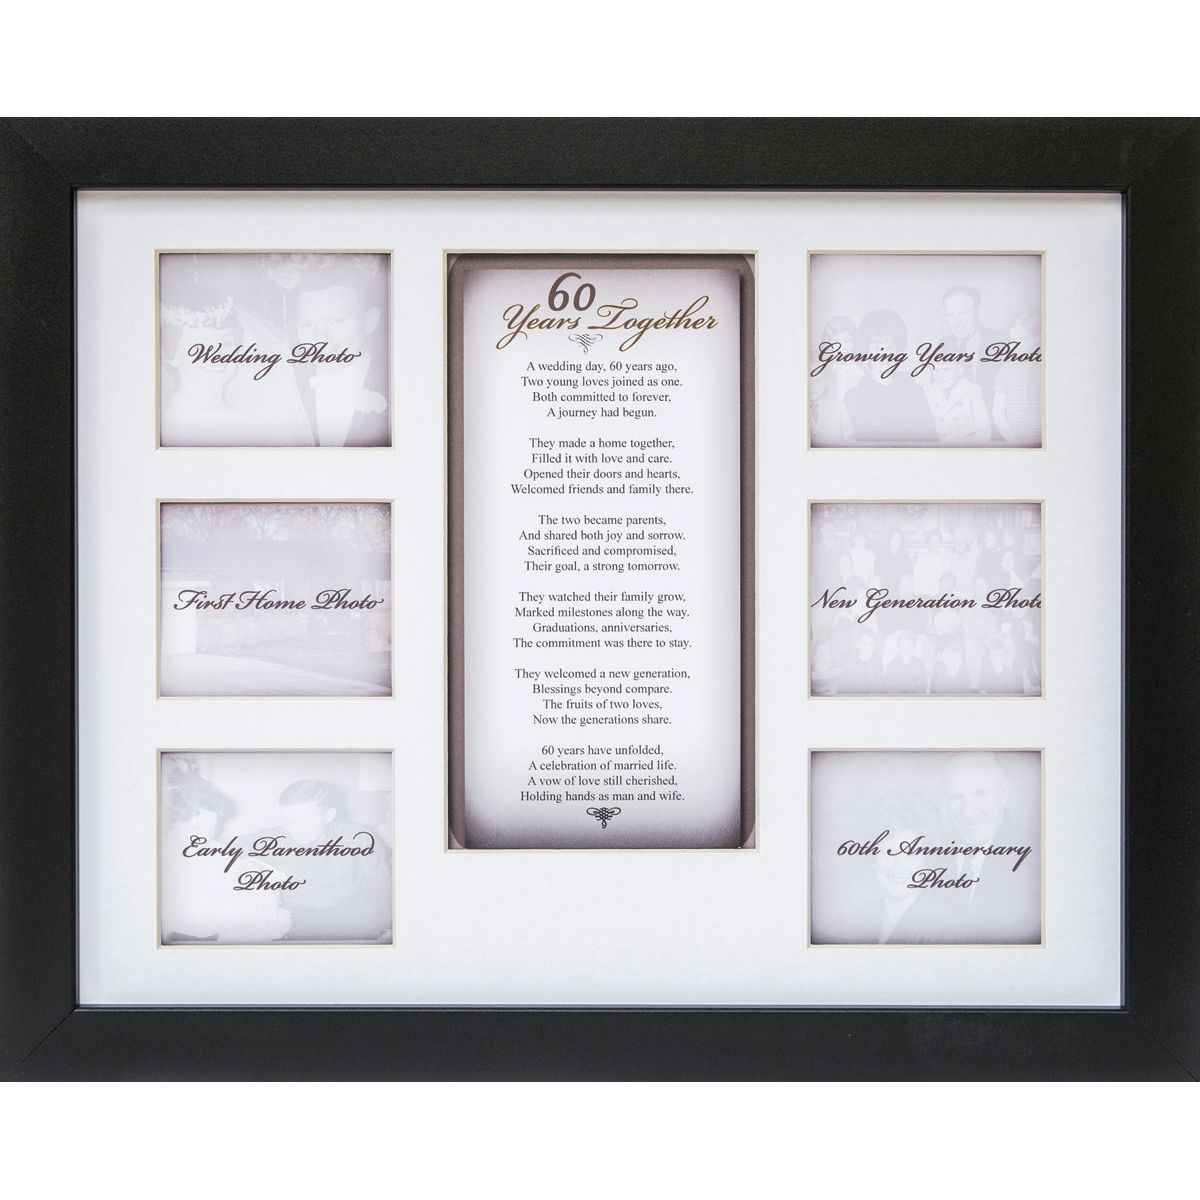 11x14 60th Wedding Anniversary Black Photo Wall Frame with "60 Years Together" sentiment in the center and space for 6 photographs of the couple's life across the years.